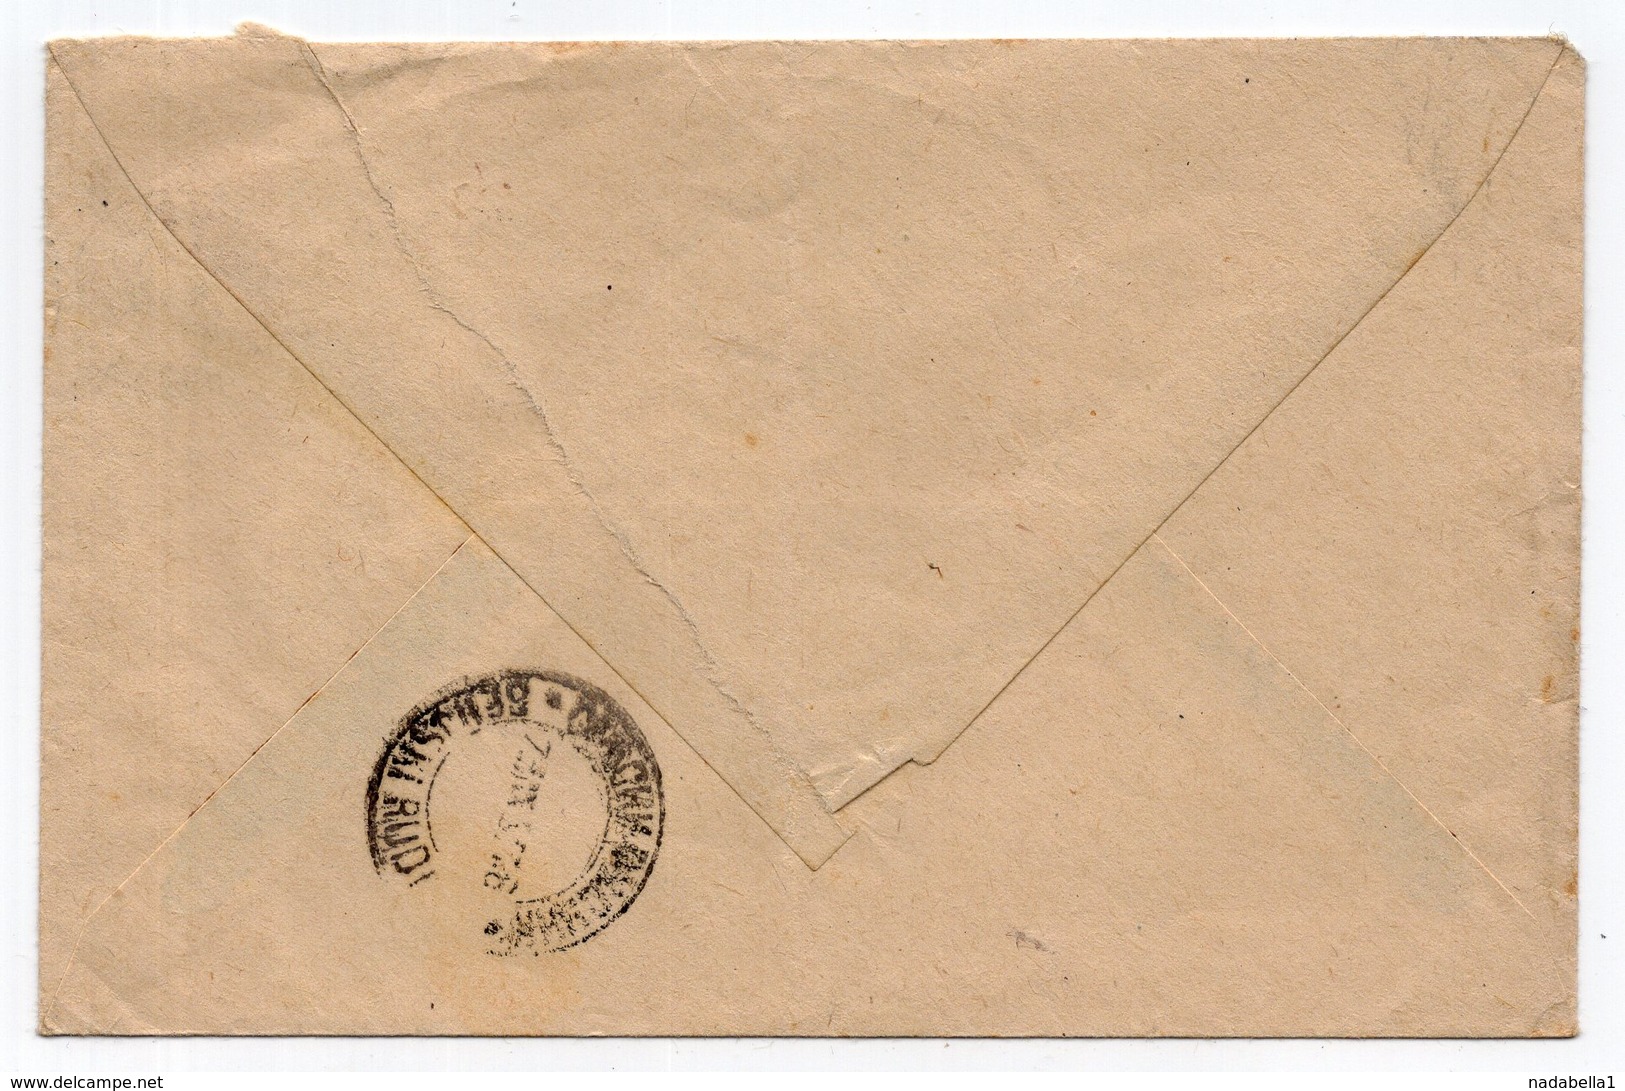 1952 YUGOSLAVIA,CROATIA, SENJ COAL MINE, COVER WITH FLAM: VISIT NAVAL AND NAVY EXHIBITION IN SPLIT, - Covers & Documents